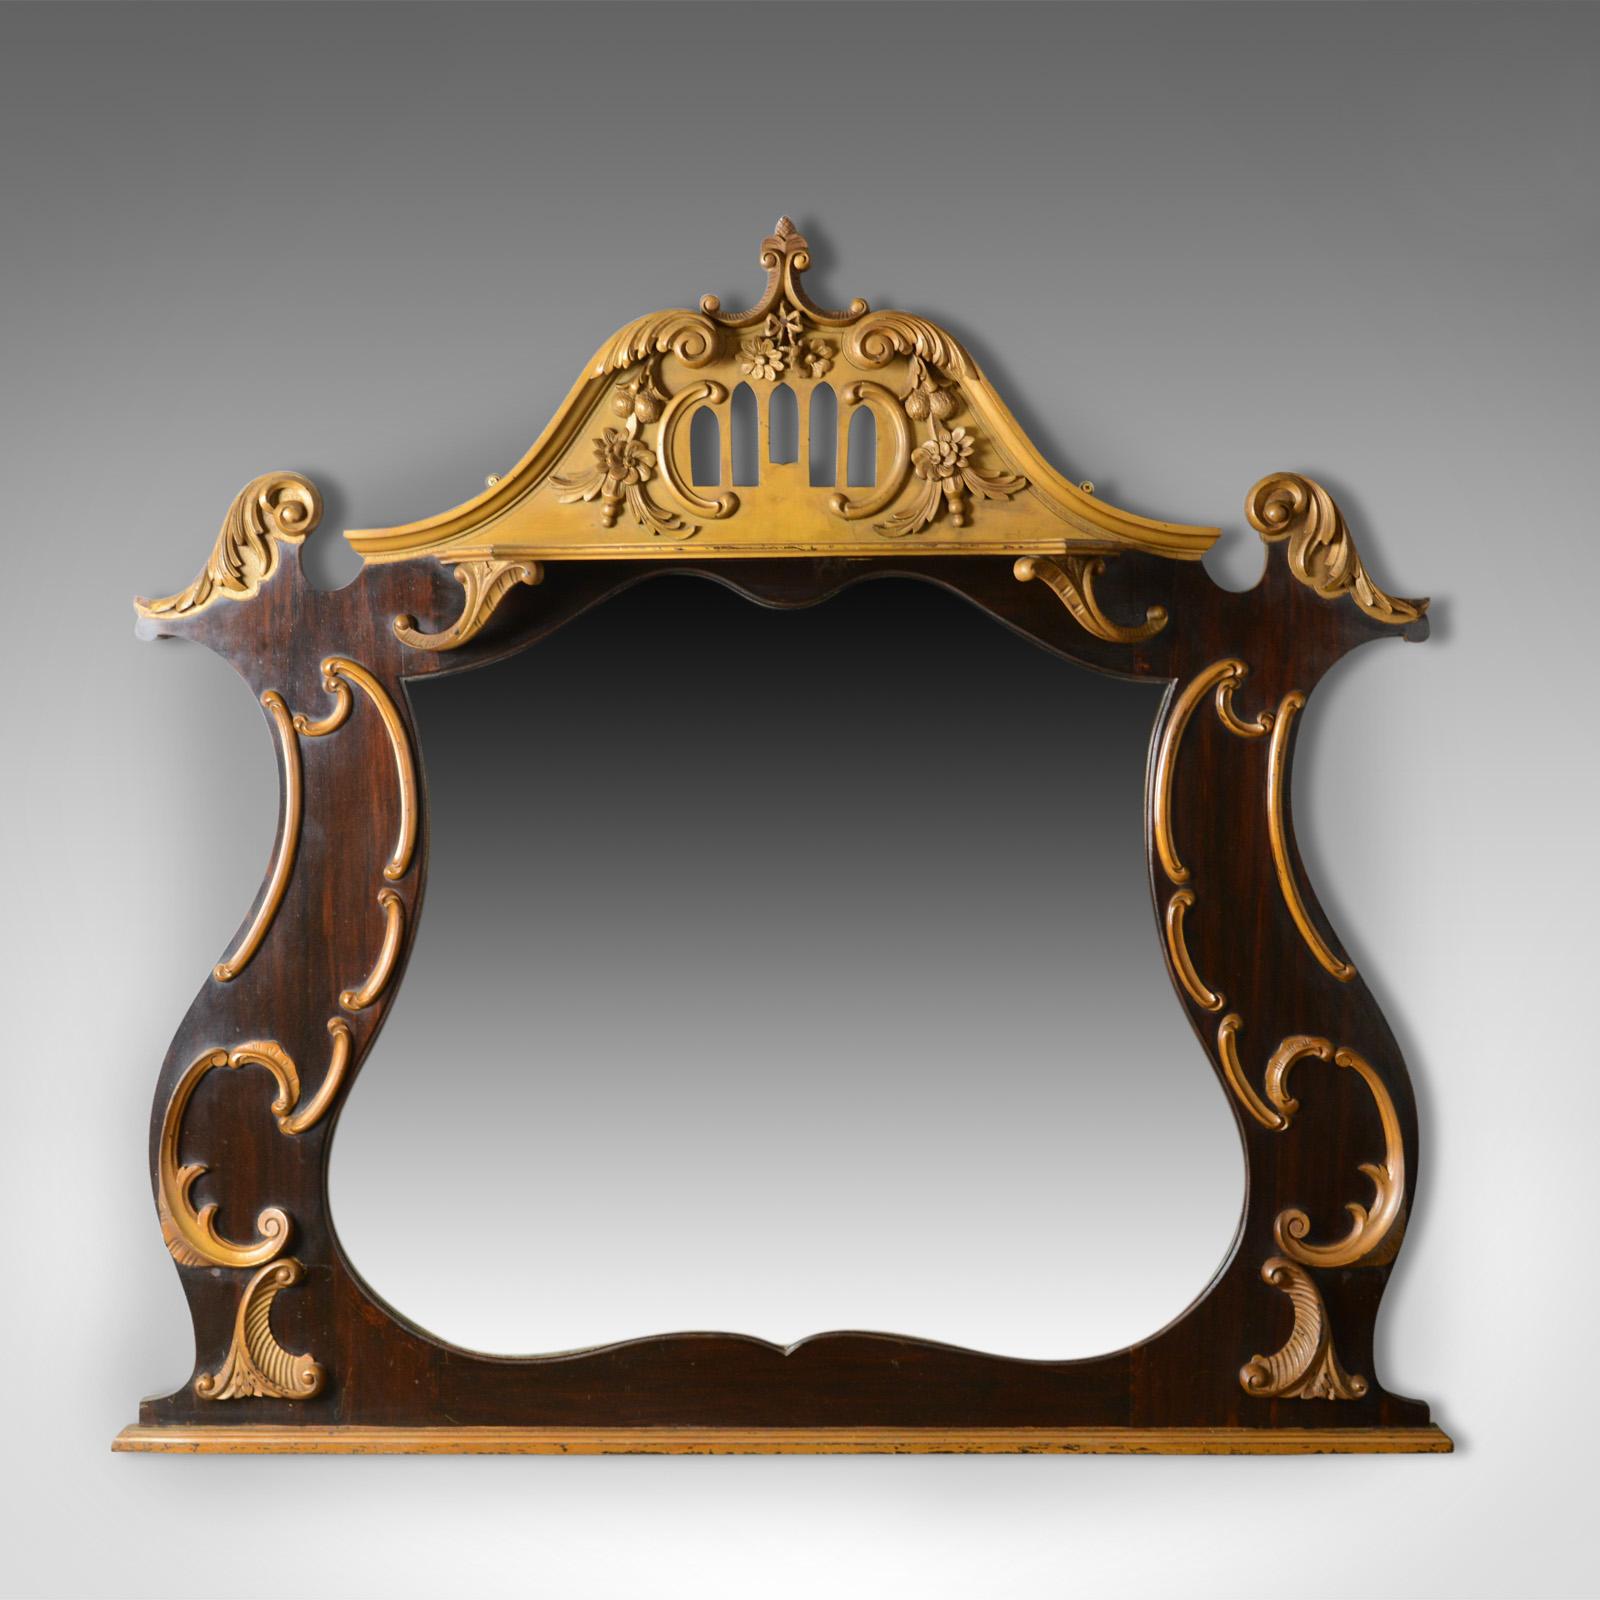 This is a large, French, Rococo revival wall mirror, a hall or overmantel mirror, ebonised with giltwood adornment dating to the early 20th century, circa 1910.

Attractive ebonised lyre shaped frame with gold appliqué
Pierced detail to the